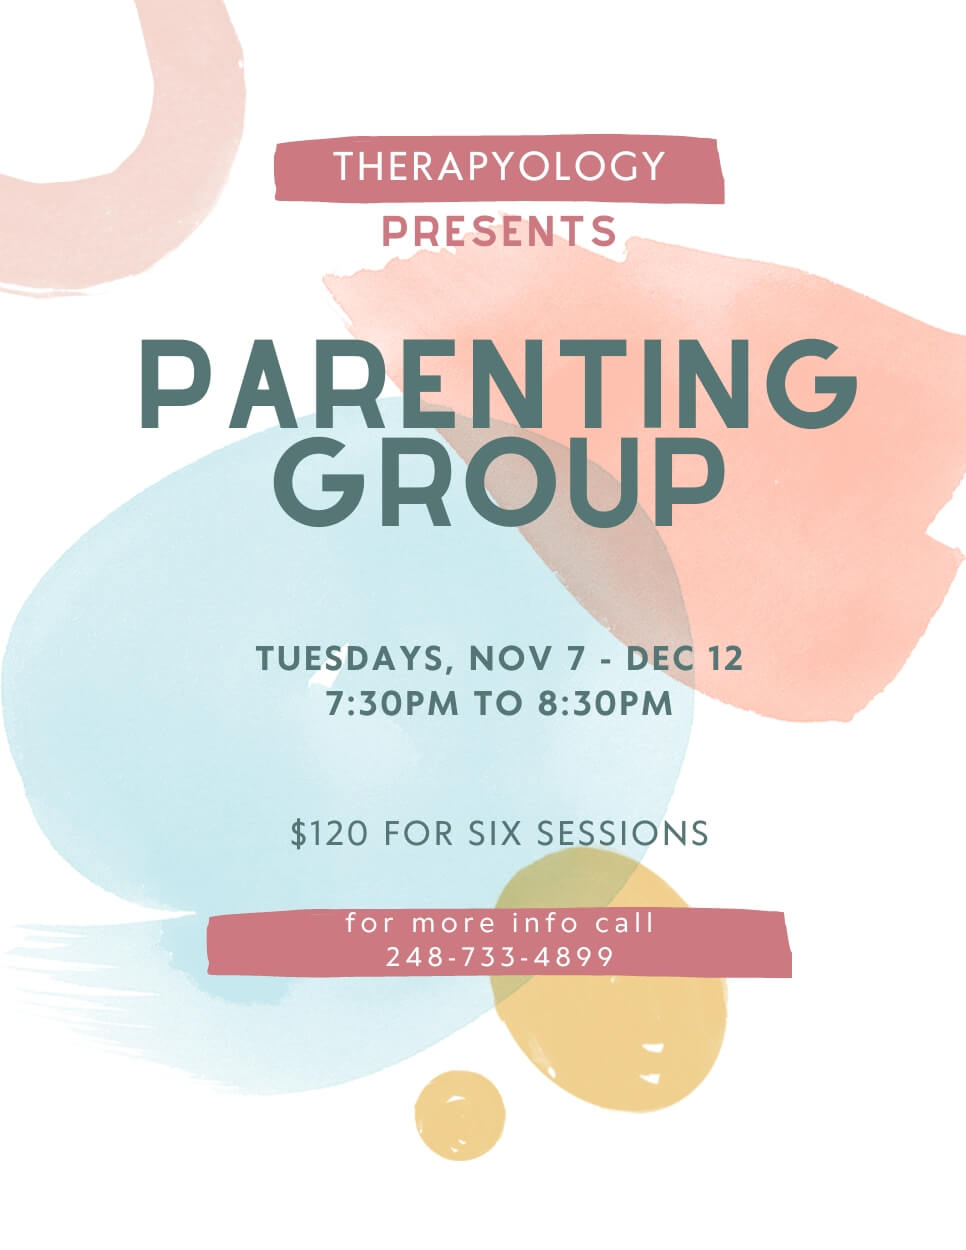 Parenting Group Flyer